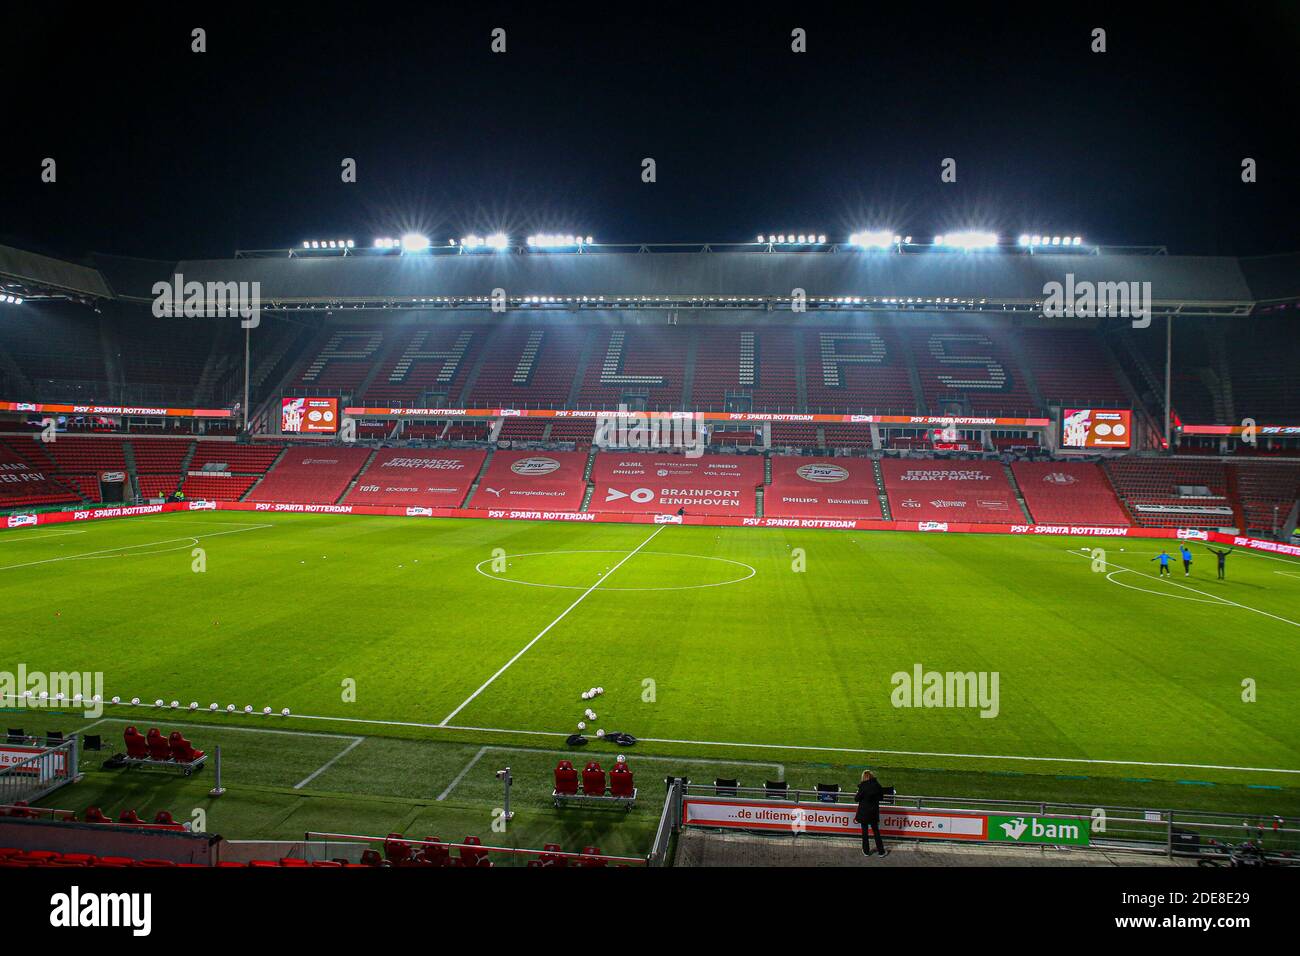 EINDHOVEN, NETHERLANDS - NOVEMBER 29: General view of Philips Stadion Stadium home of PSV Eindhoven before the game during the Dutch Eredivisie match Stock Photo